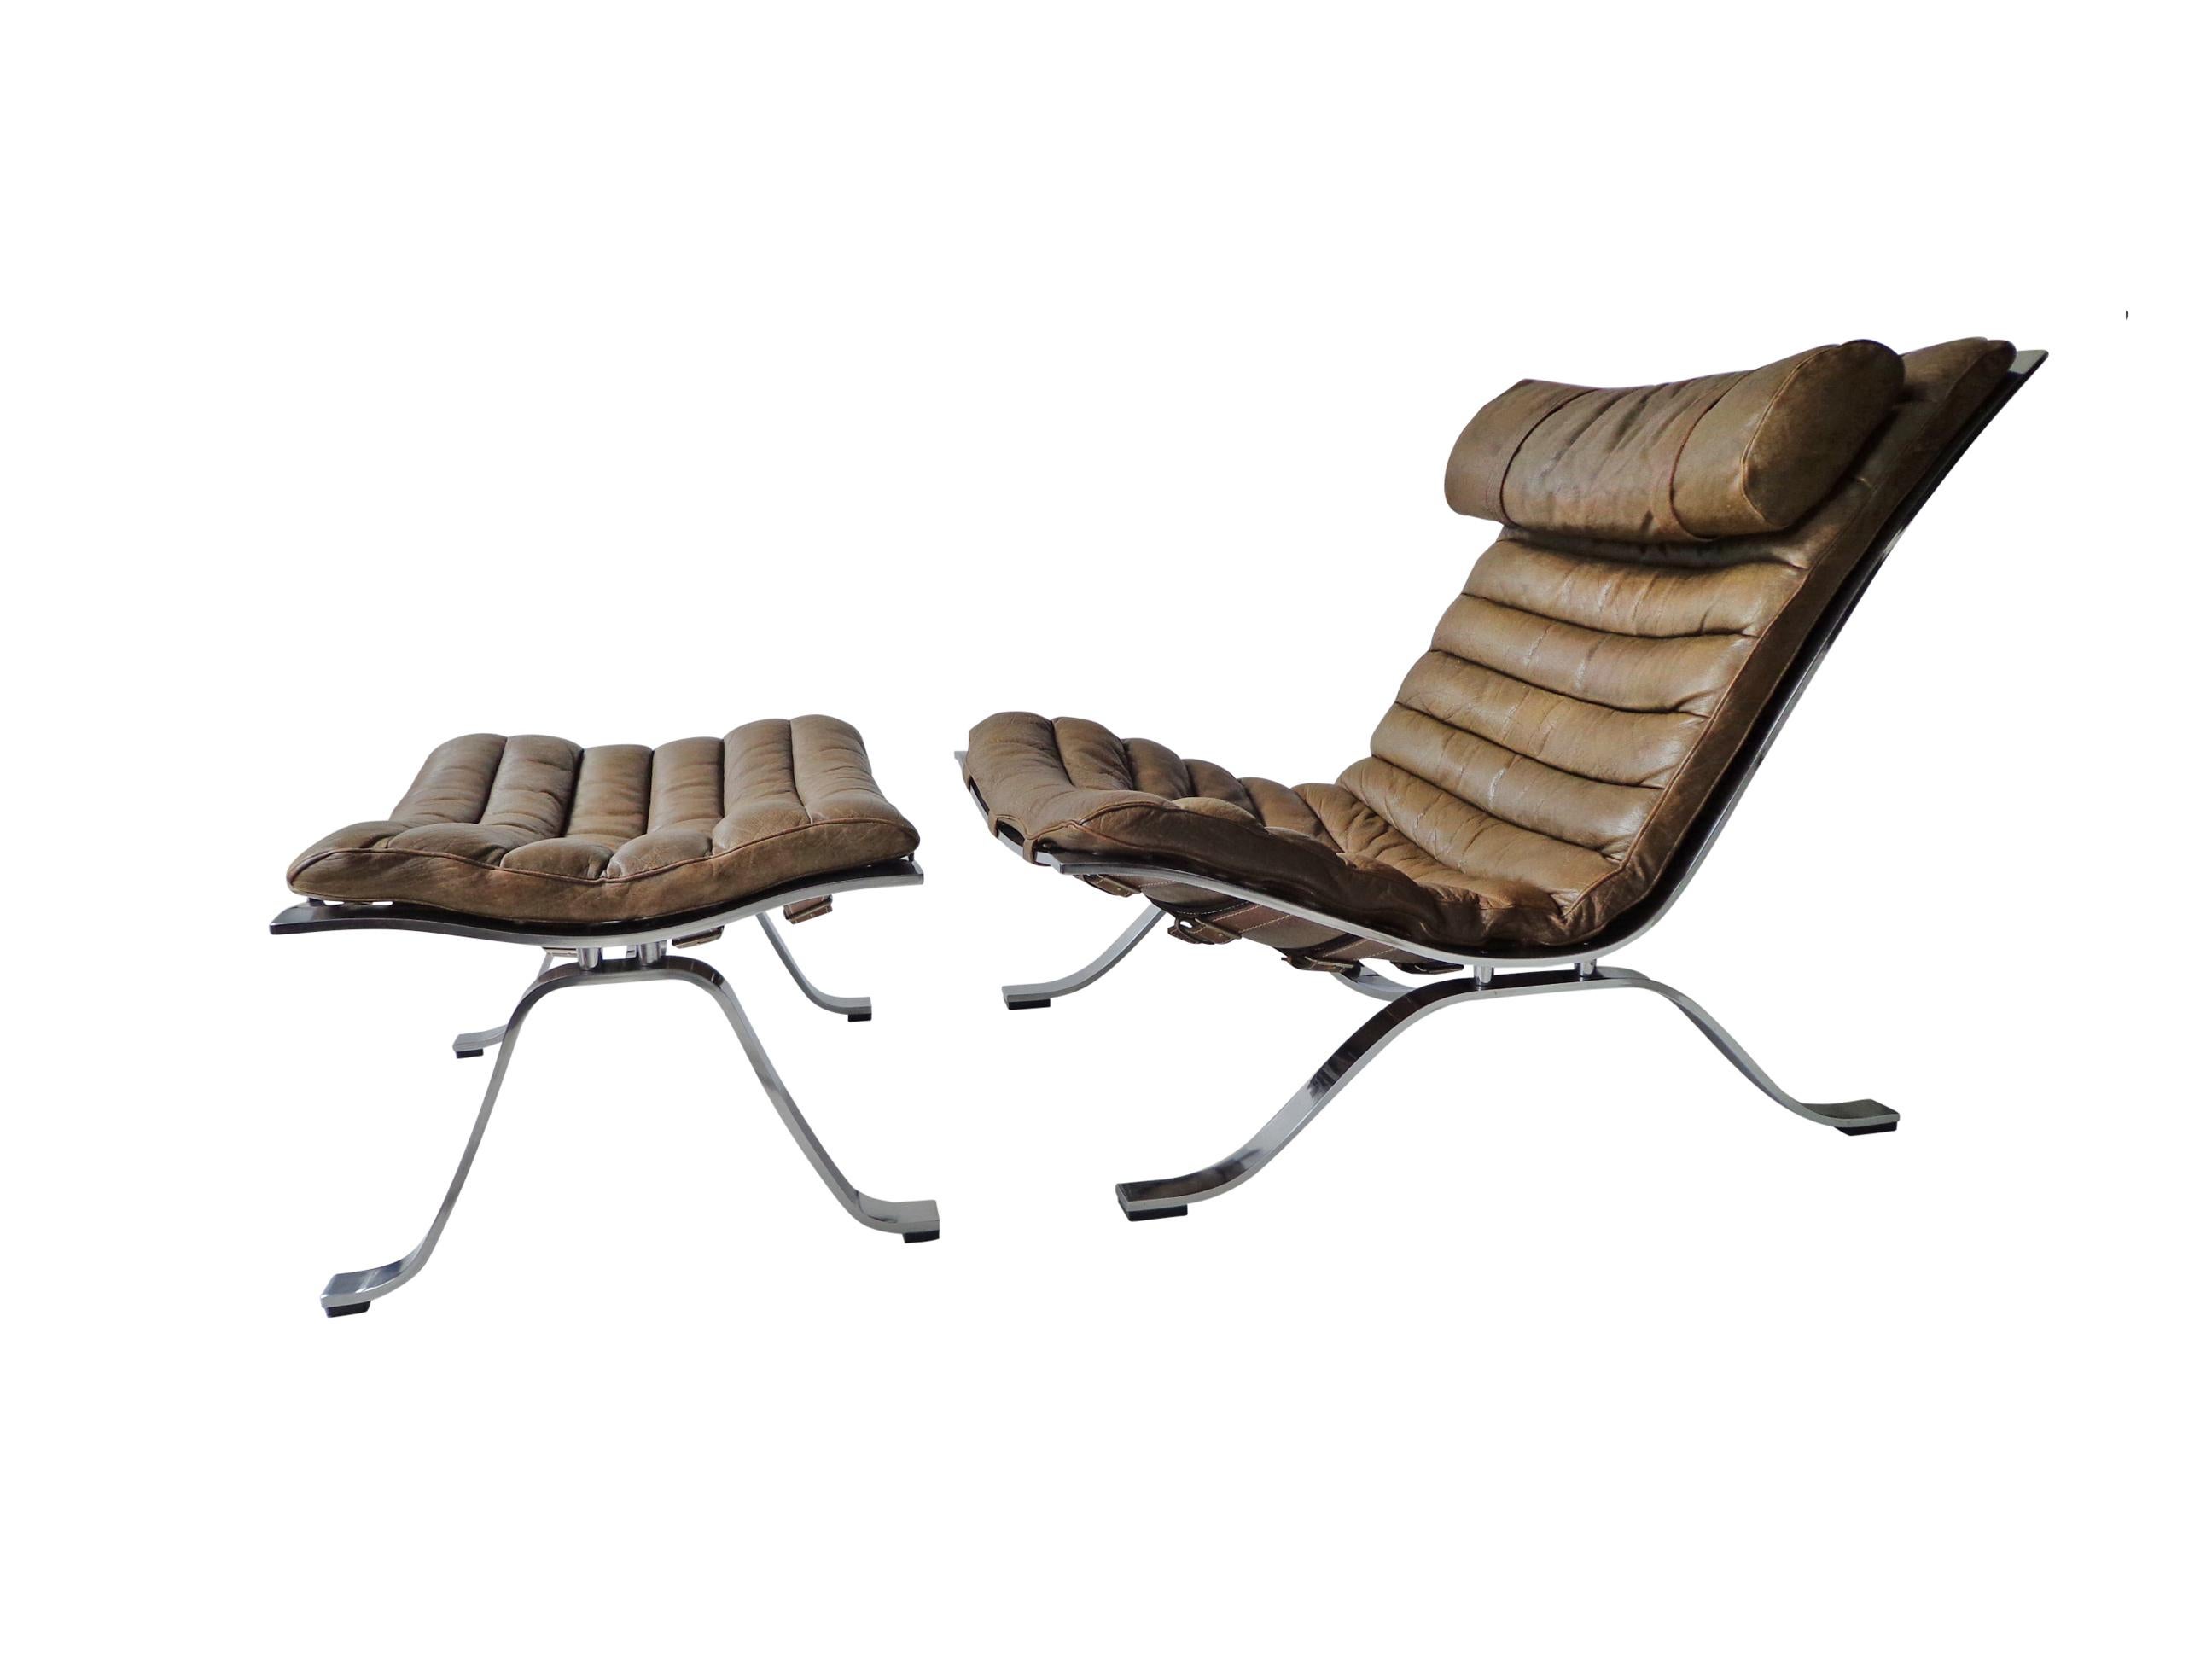 Comfortable lounge chair and ottoman designed by Arne Norell. This award winning lounge chair is made of high quality flat matte-chrome-plated steel and original cognac/brown leather. The set is in beautiful condition with fantastic patina from age